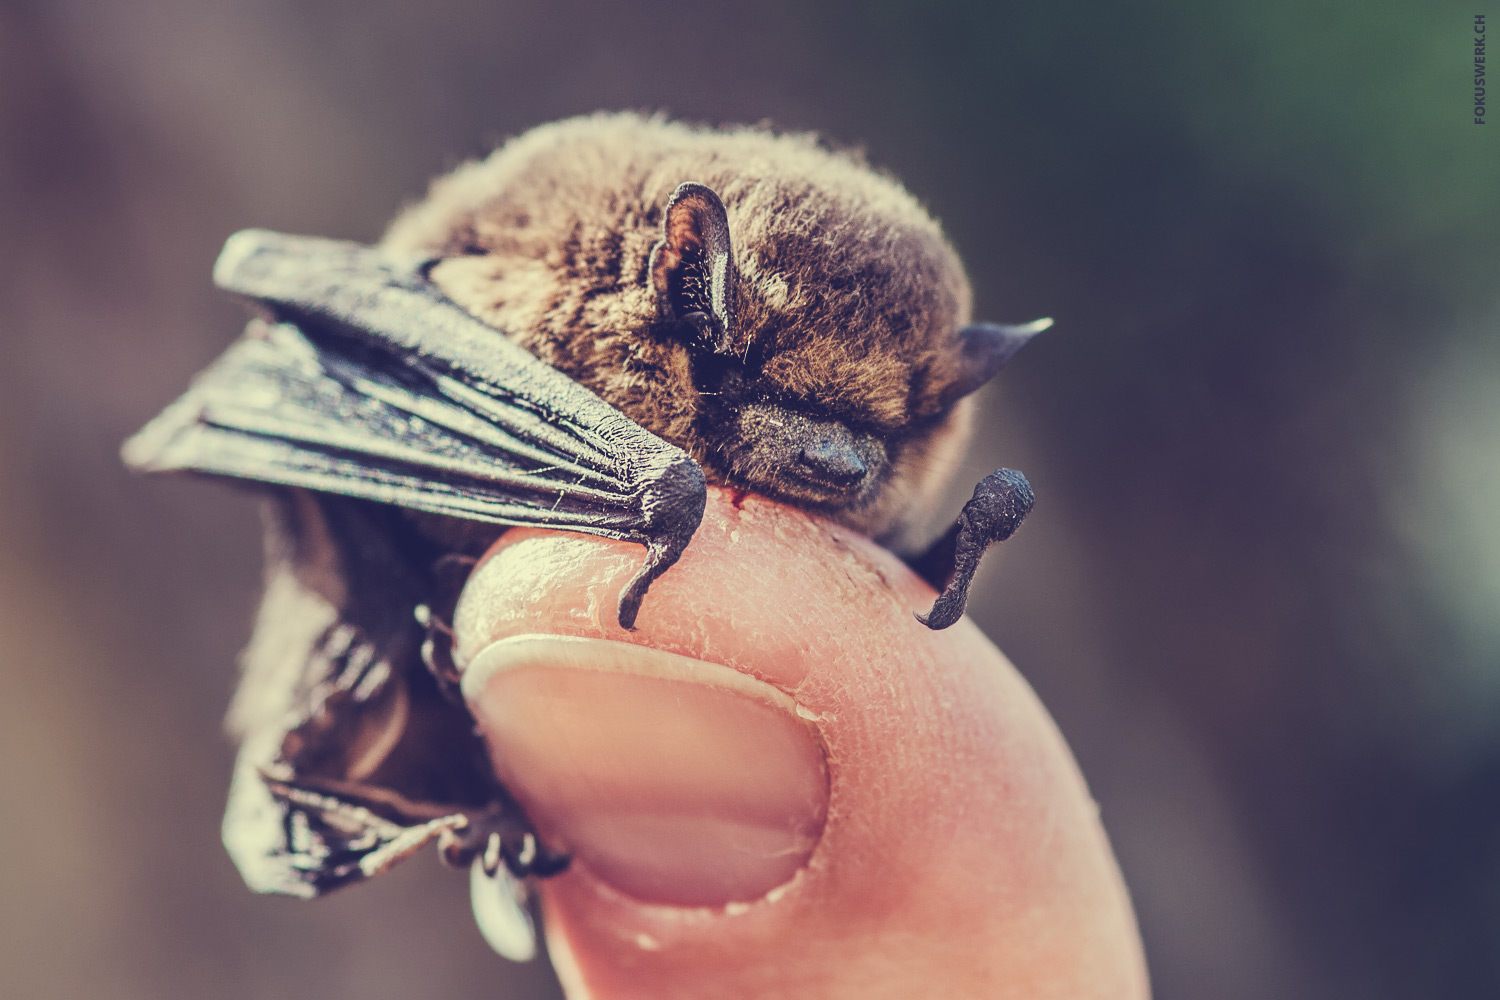 Common pipistrelle on a thumb